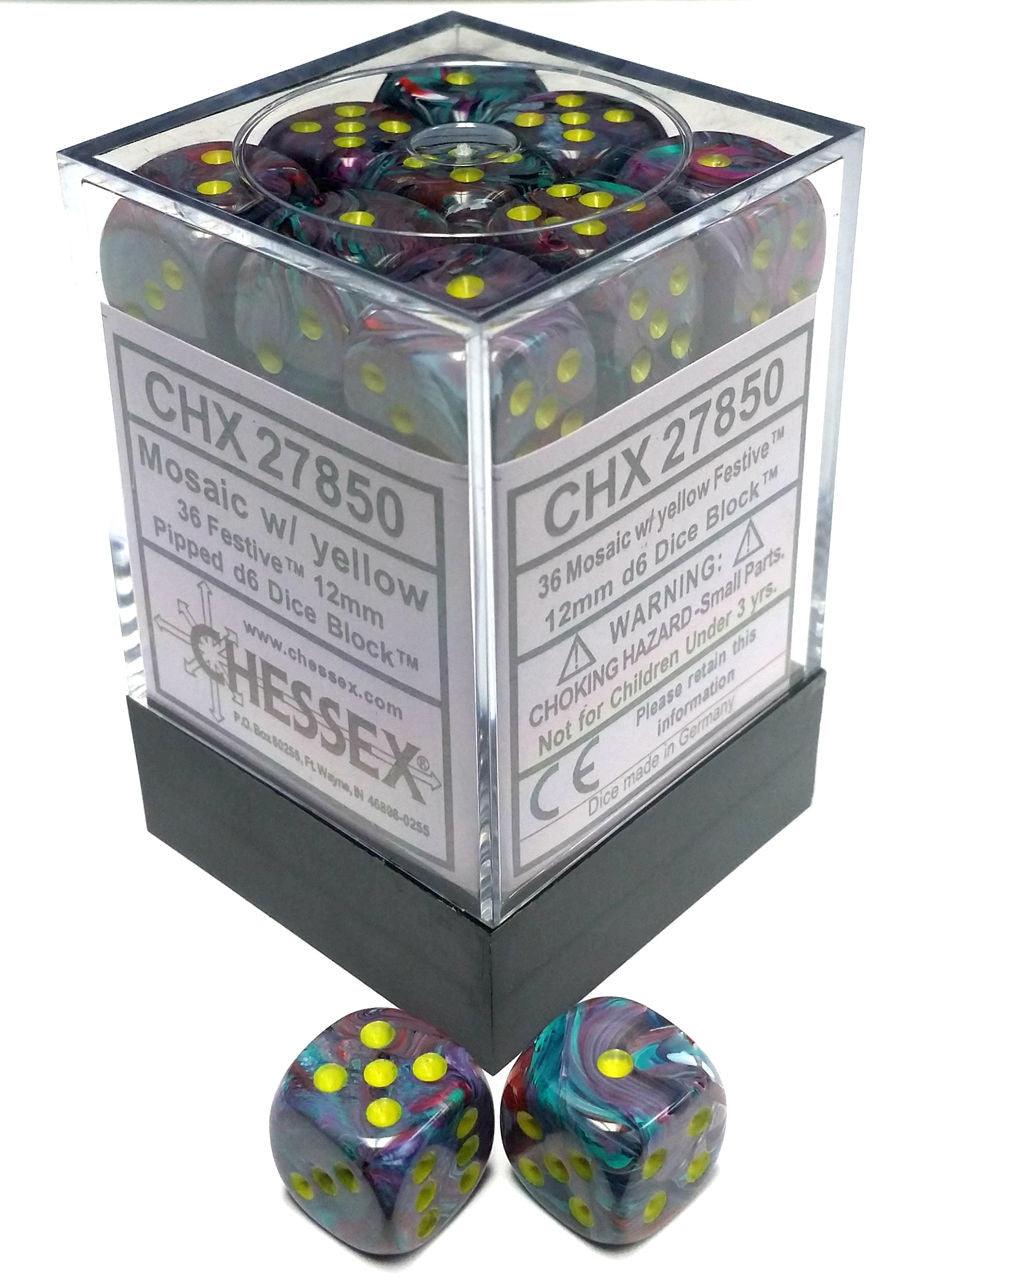 D6 Dice Festive 12mm Mosaic/Yellow (36 Dice in Display) Chessex Titan Pop Culture